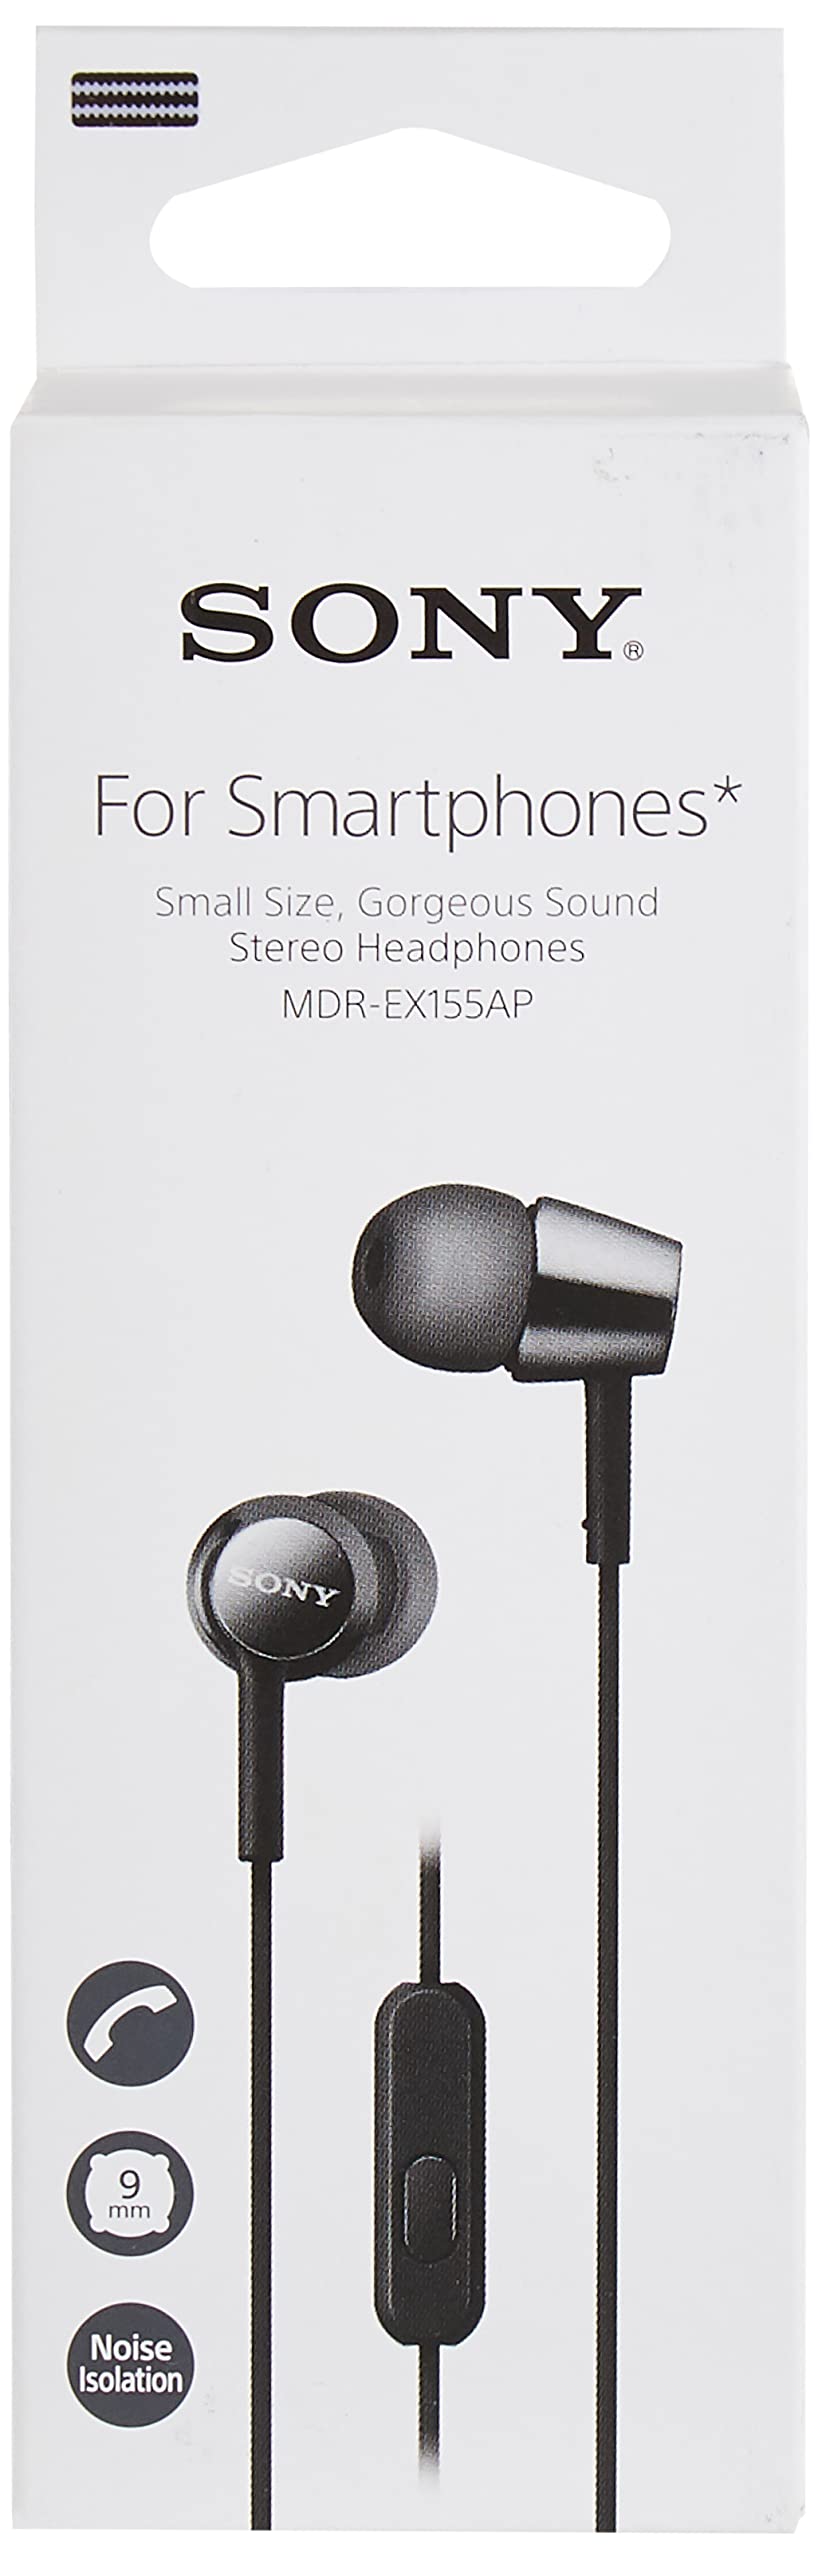 Sony Mdr Ex155Ap Wired In Ear Headphones With Tangle Free Cable, 3.5mm Mini-jack pin, Earphone Mic For Phone Calls, Black, Mdrex155Ap/B, 17.3 X 4 cm